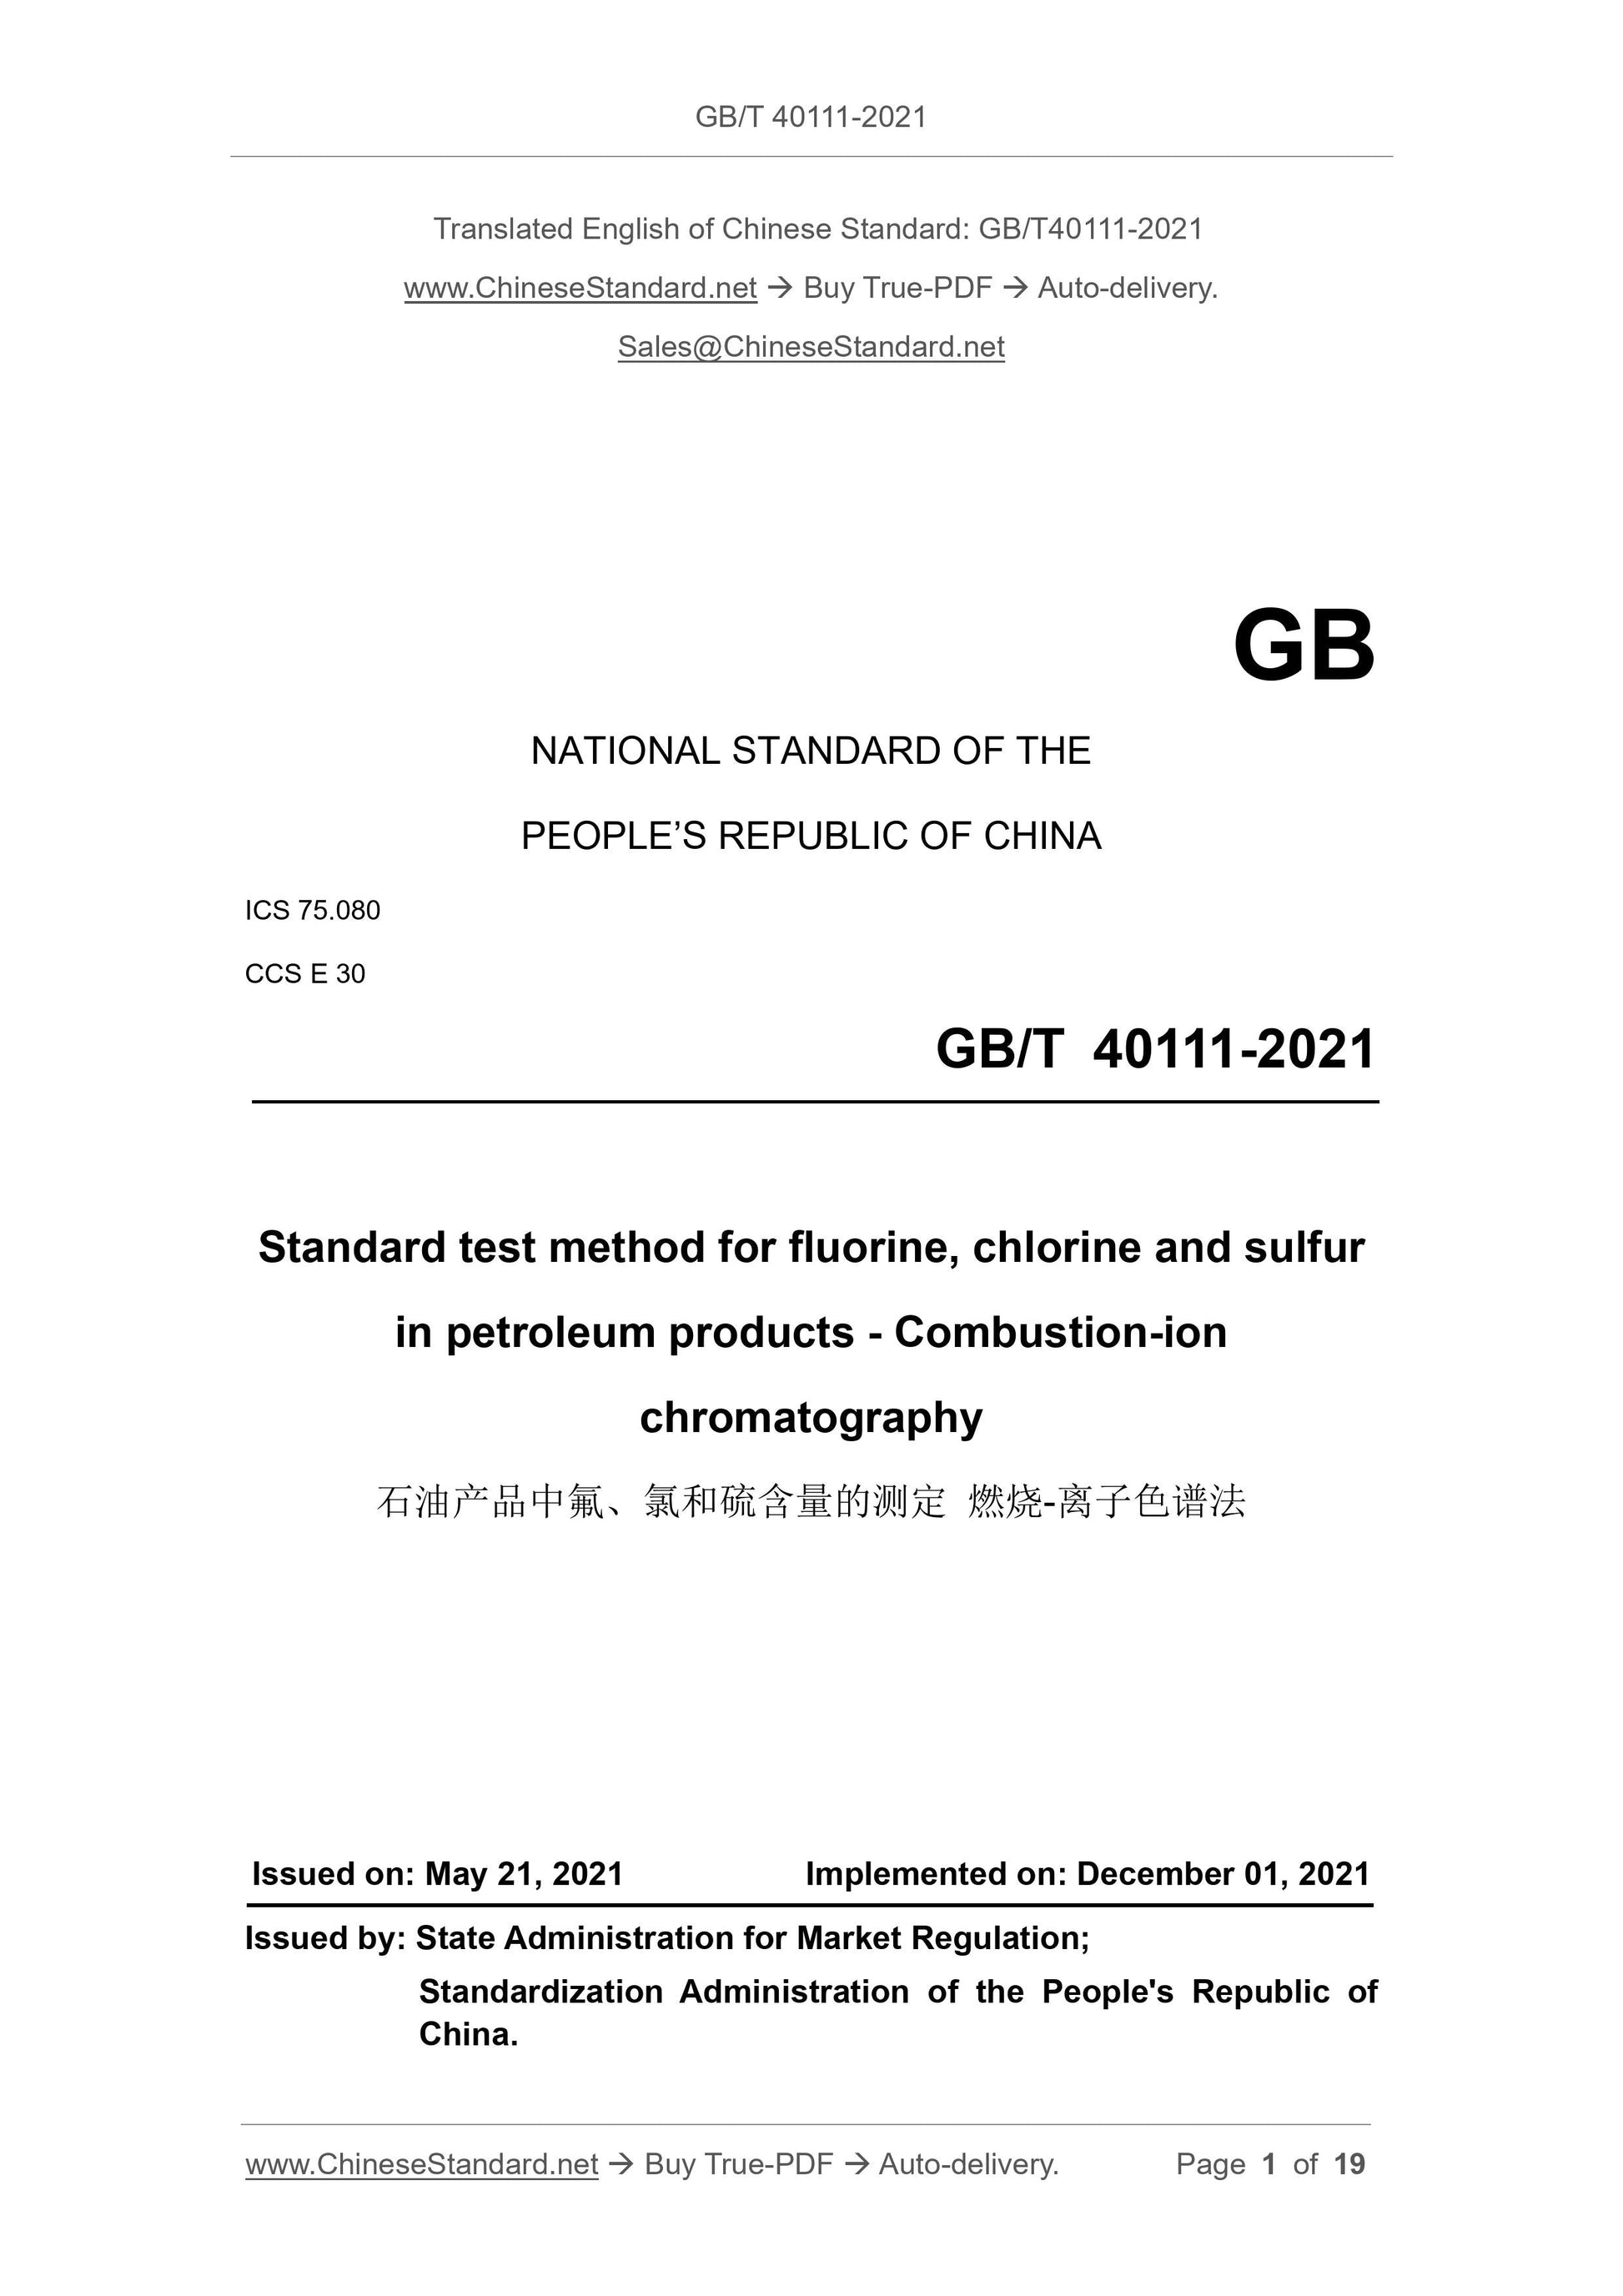 GB/T 40111-2021 Page 1